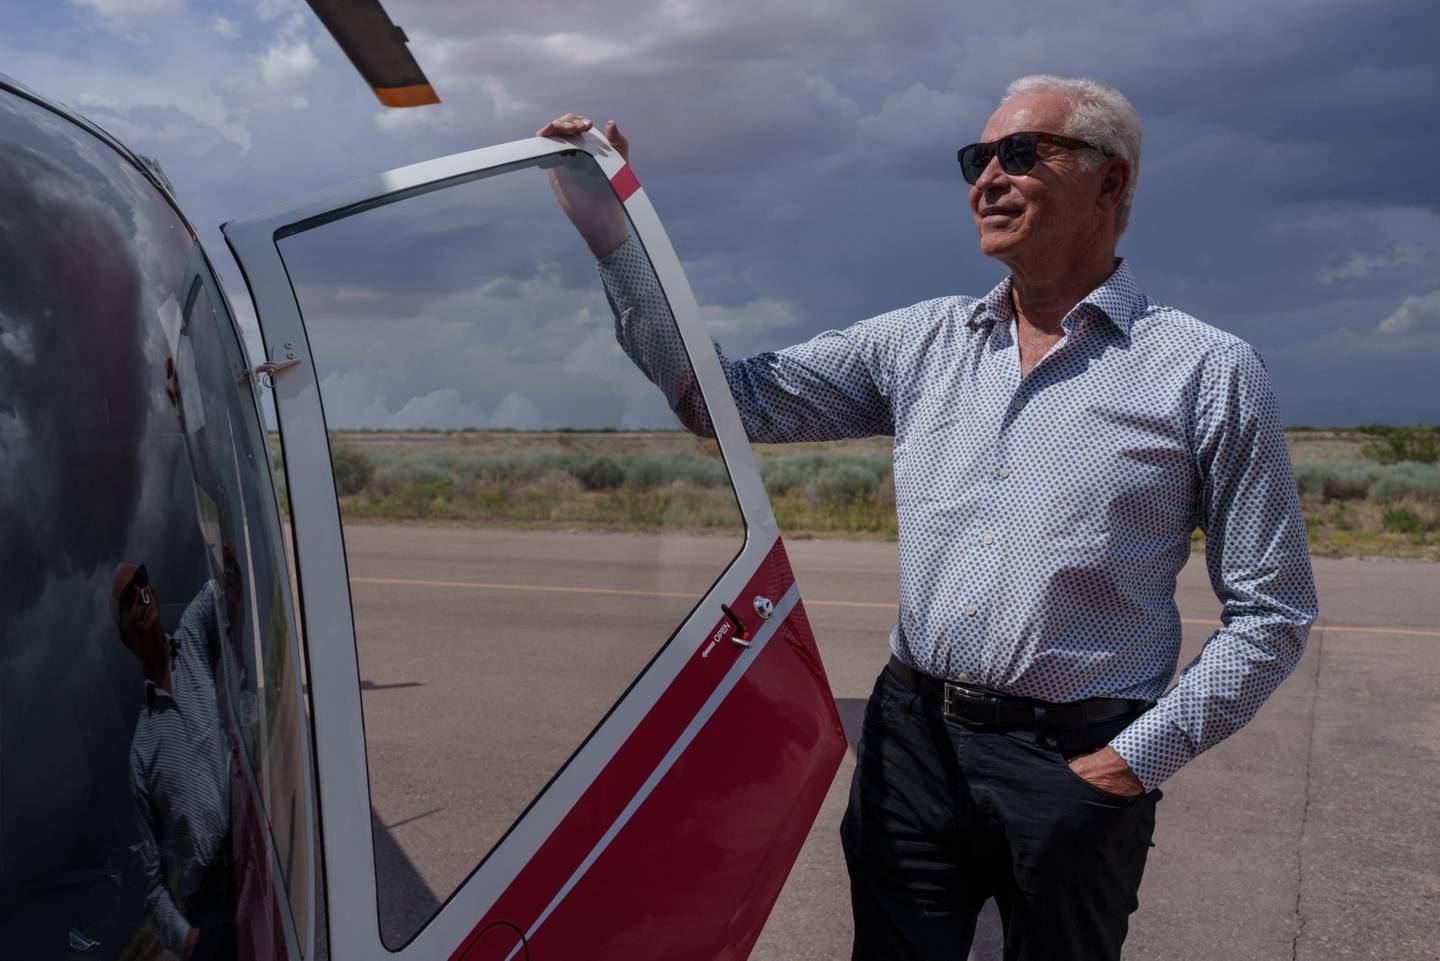 Alan Russel, chairman and CEO of TECMA, poses for a portrait next to his helicopter at the Dona Ana County International Jetport in Santa Teresa, New Mexico on Tuesday, August 9, 2022.dfd